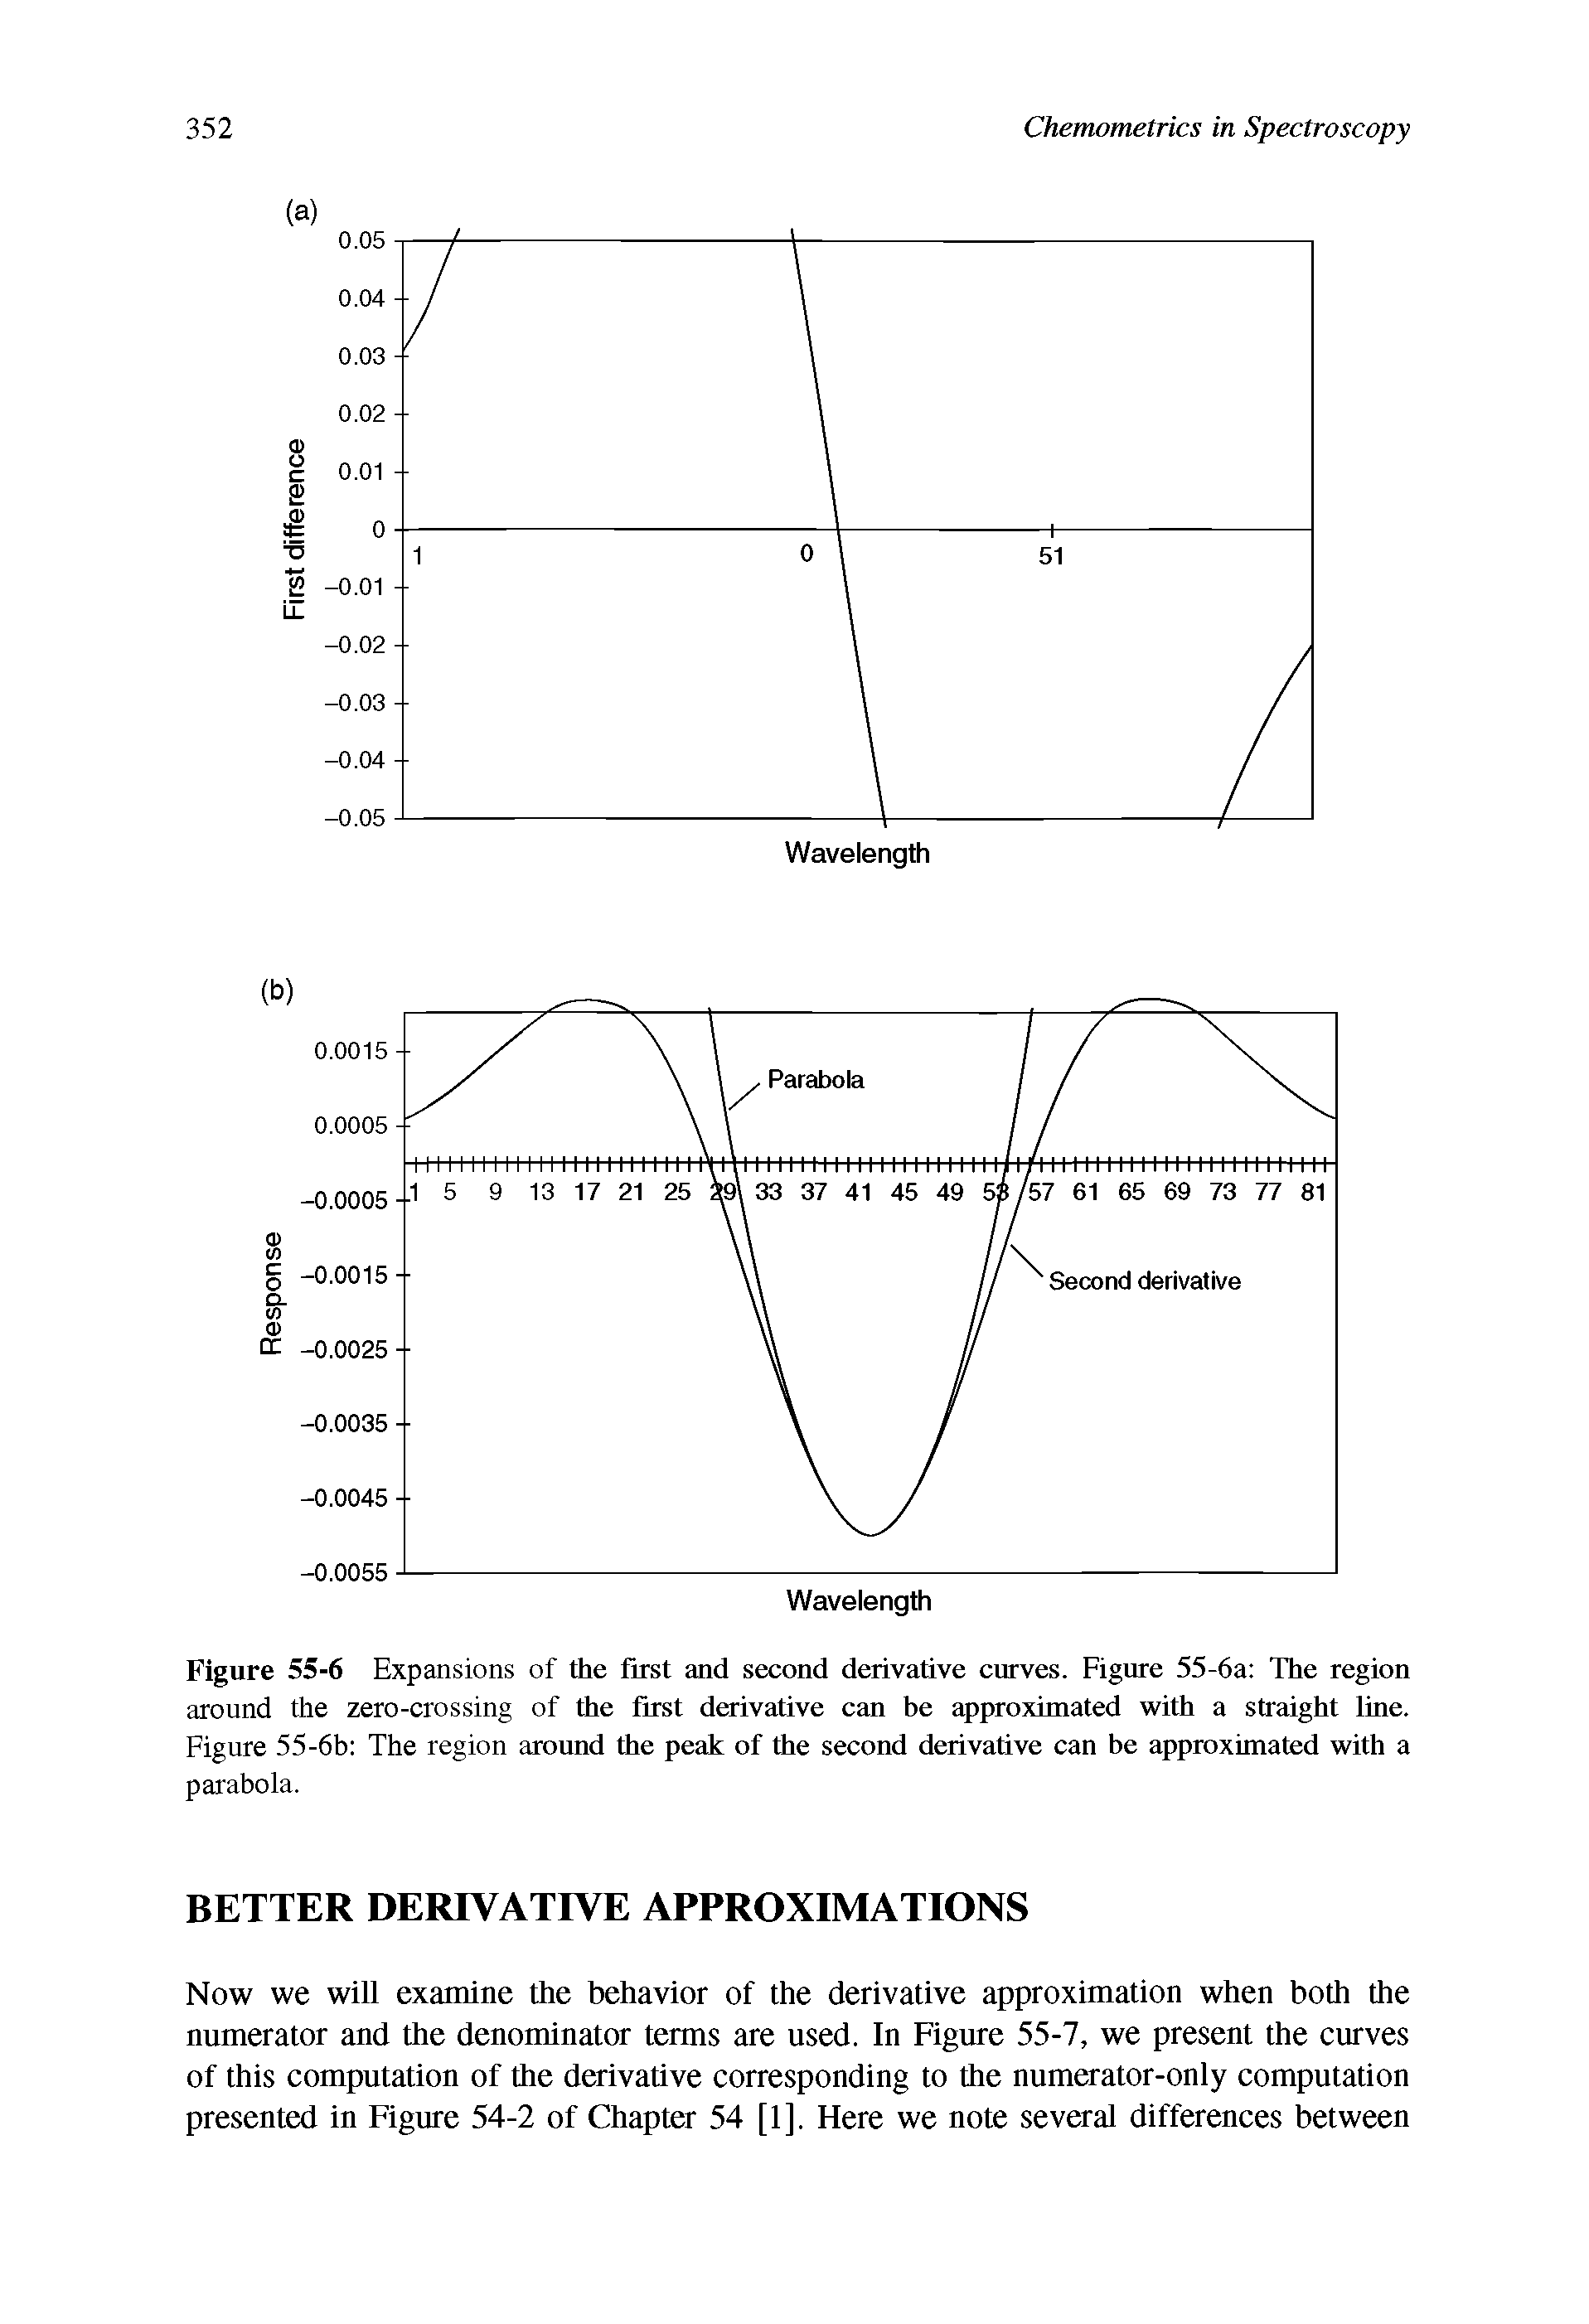 Figure 55-6 Expansions of the first and second derivative curves. Figure 55-6a The region around the zero-crossing of the first derivative can be approximated with a straight line. Figure 55-6b The region around the peak of the second derivative can be approximated with a parabola.